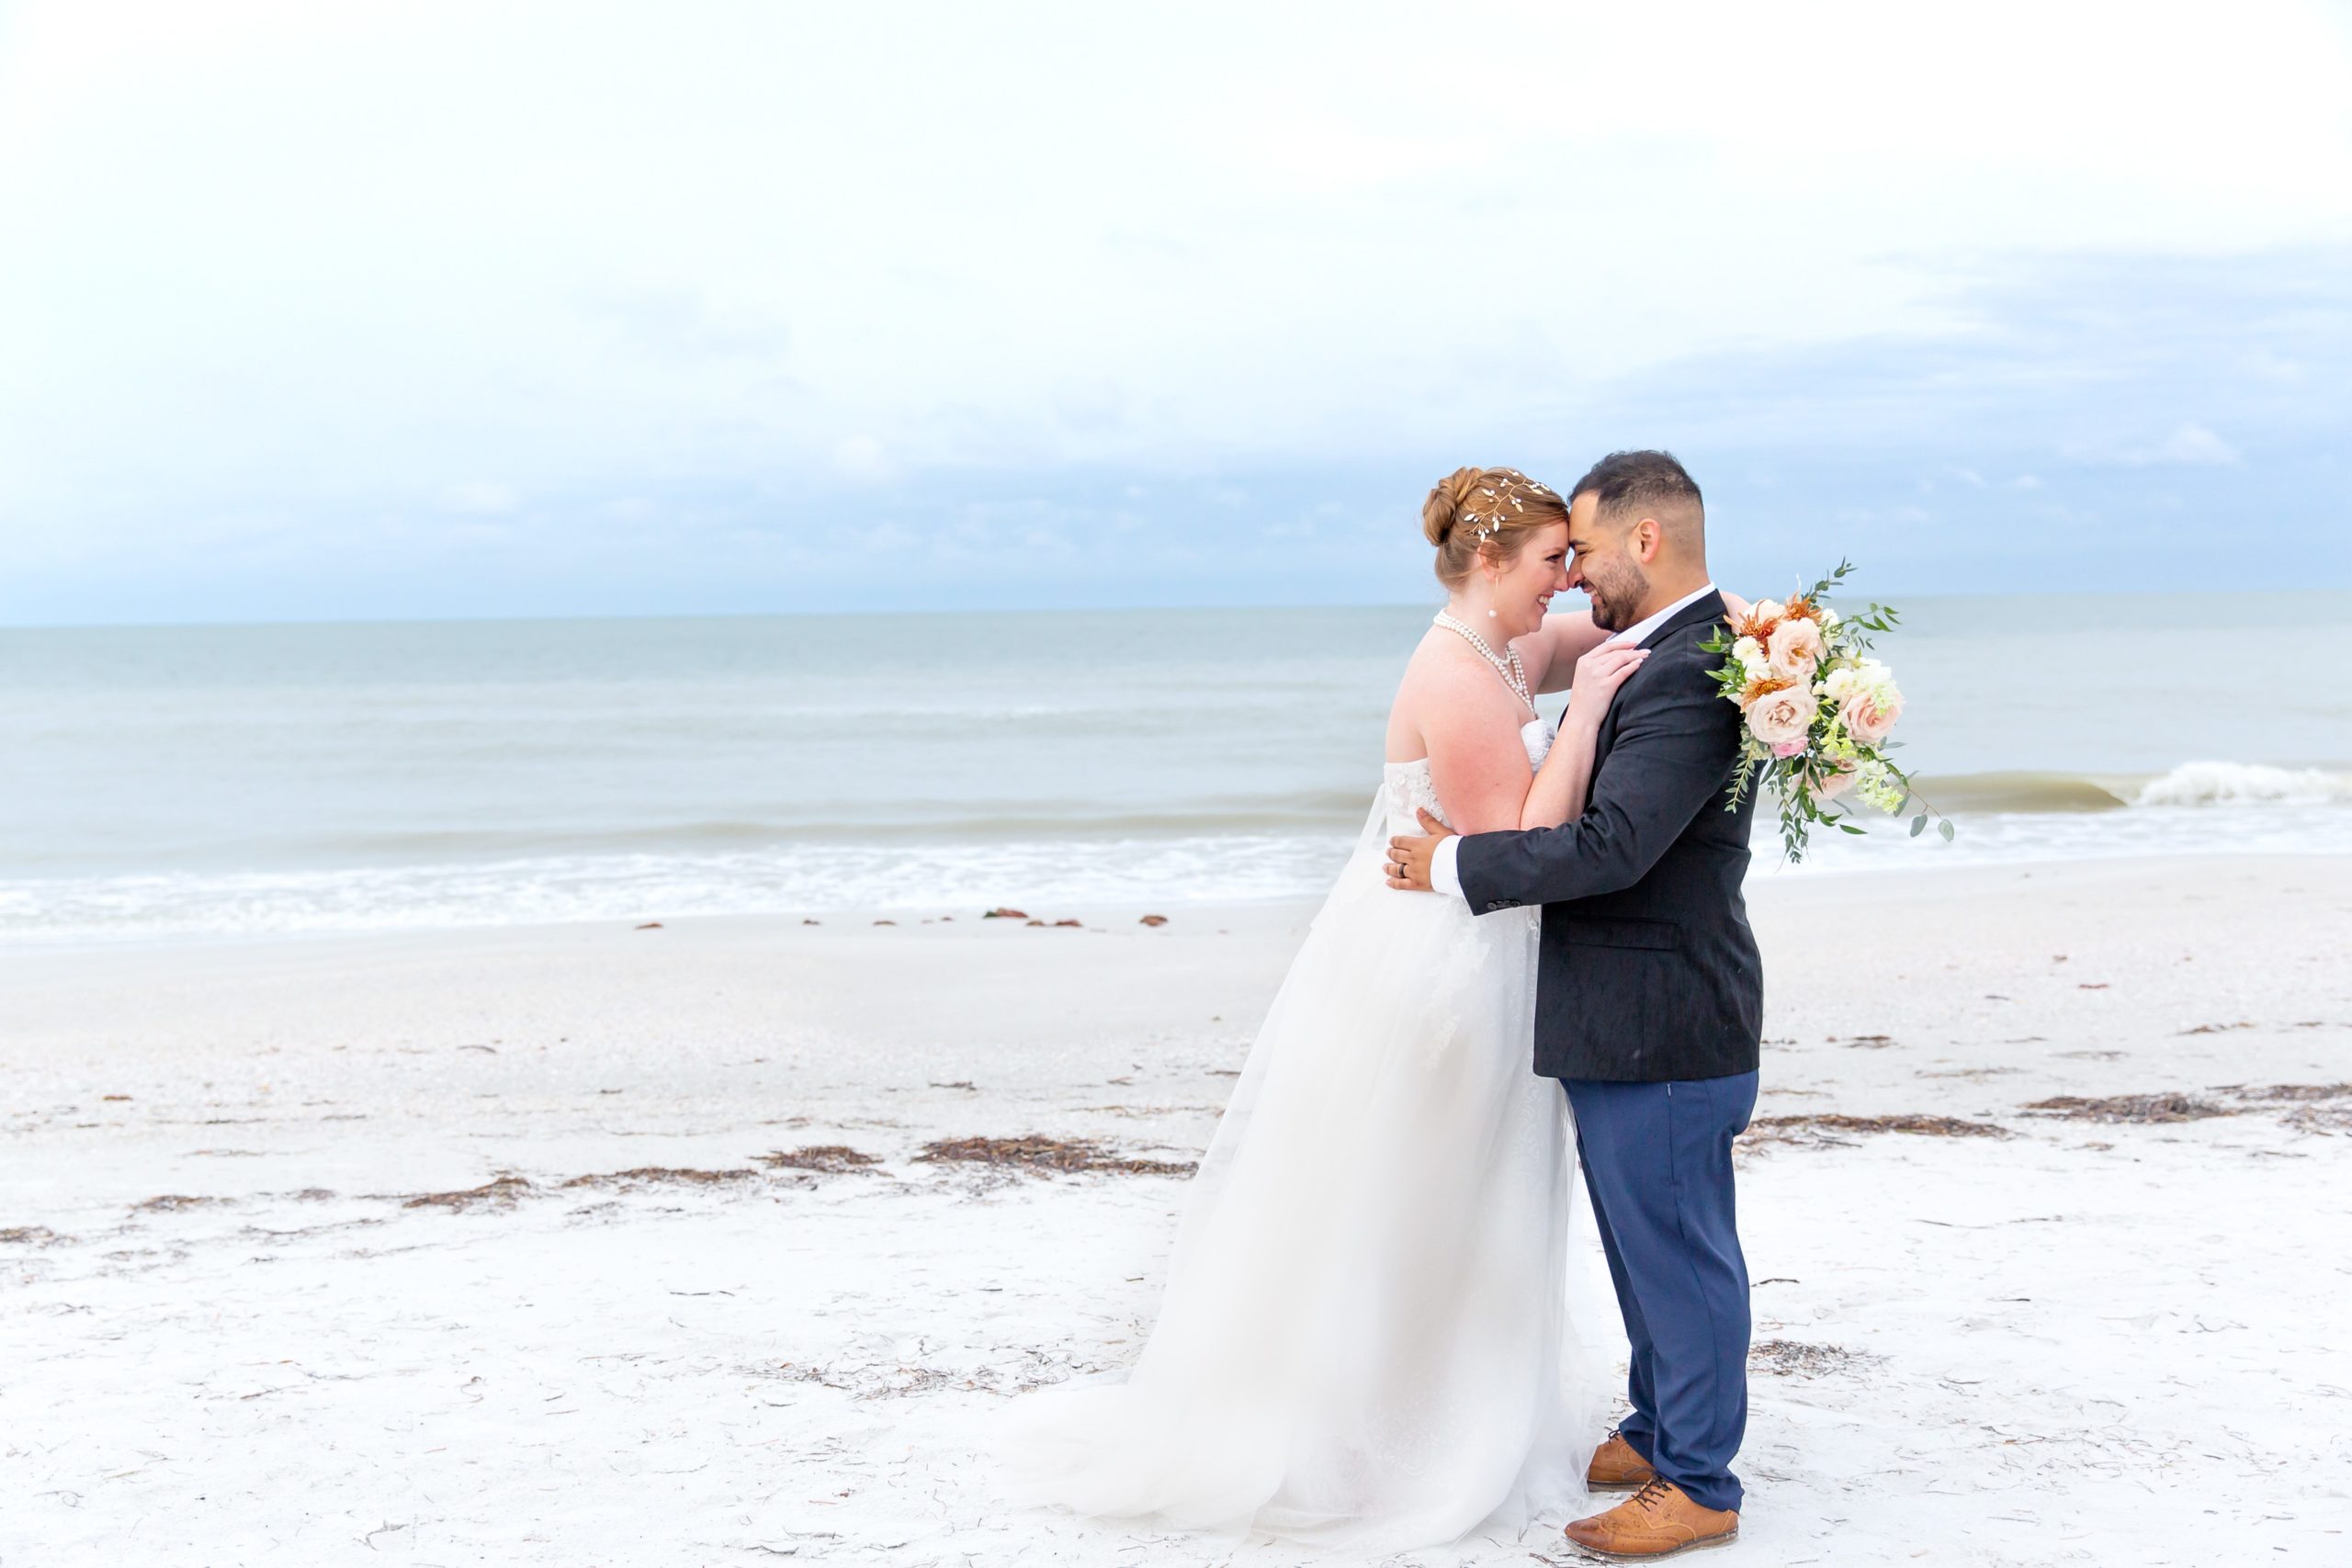 Bride & Groom laughing on the beach after Treasure Island elopement